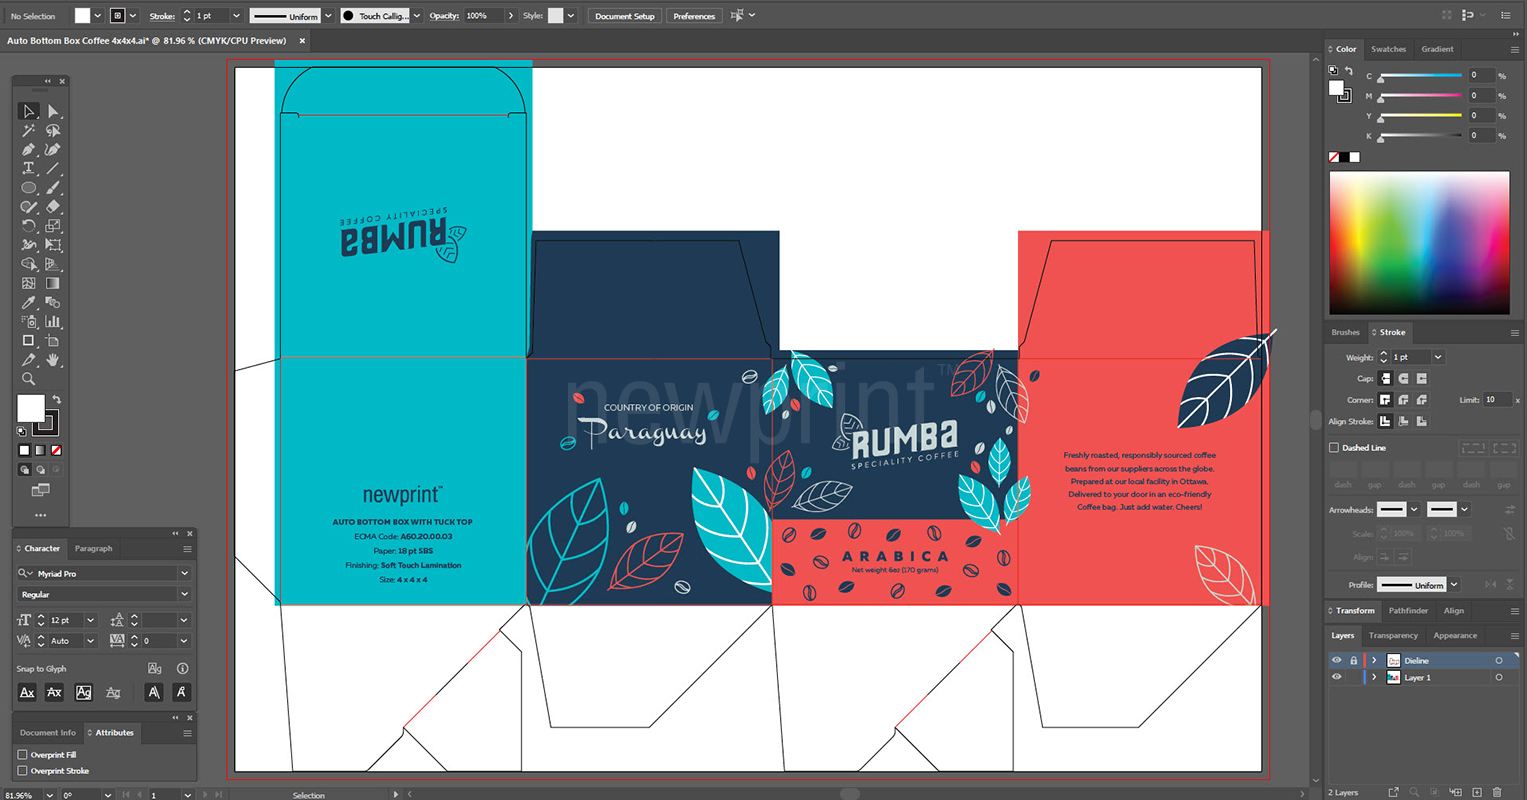 Screenshot of Adobe Illustrator interface with an opened file that shows a graphic design applied on a packaging dieline.